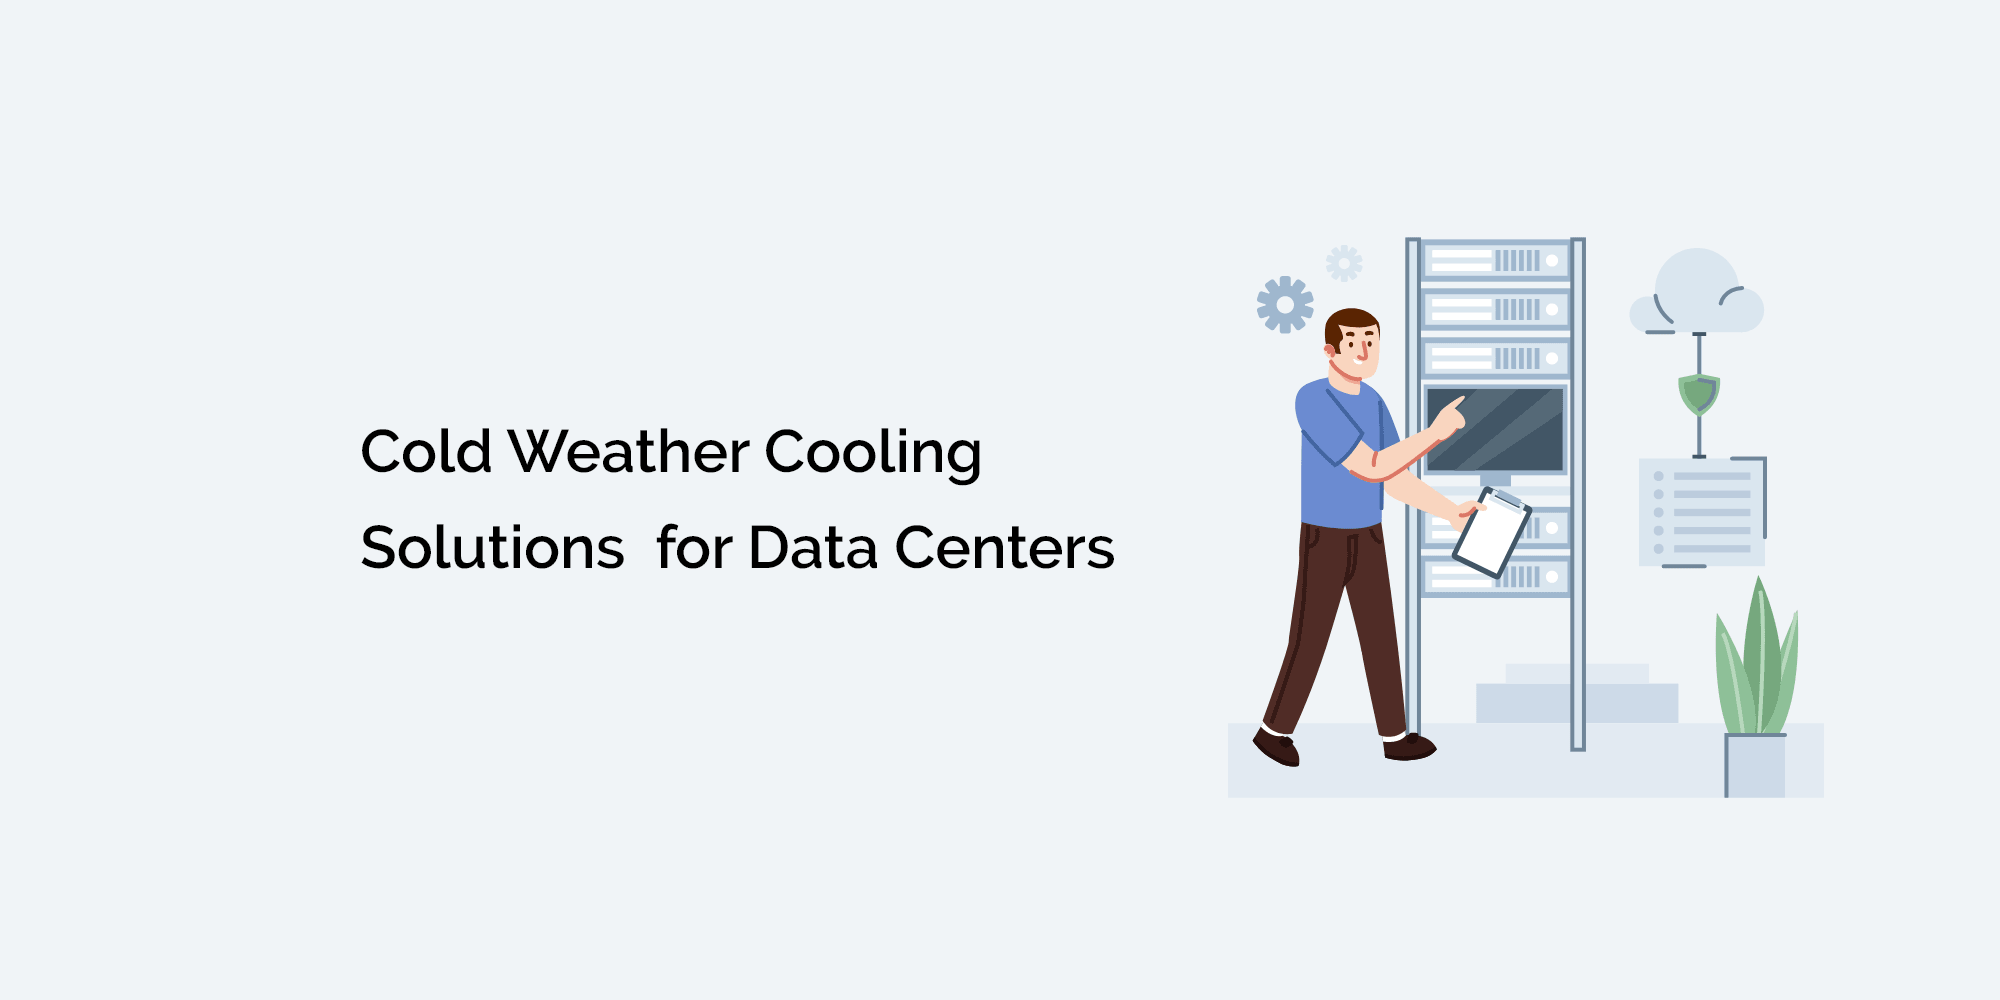 Cold Weather Cooling Solutions for Data Centers